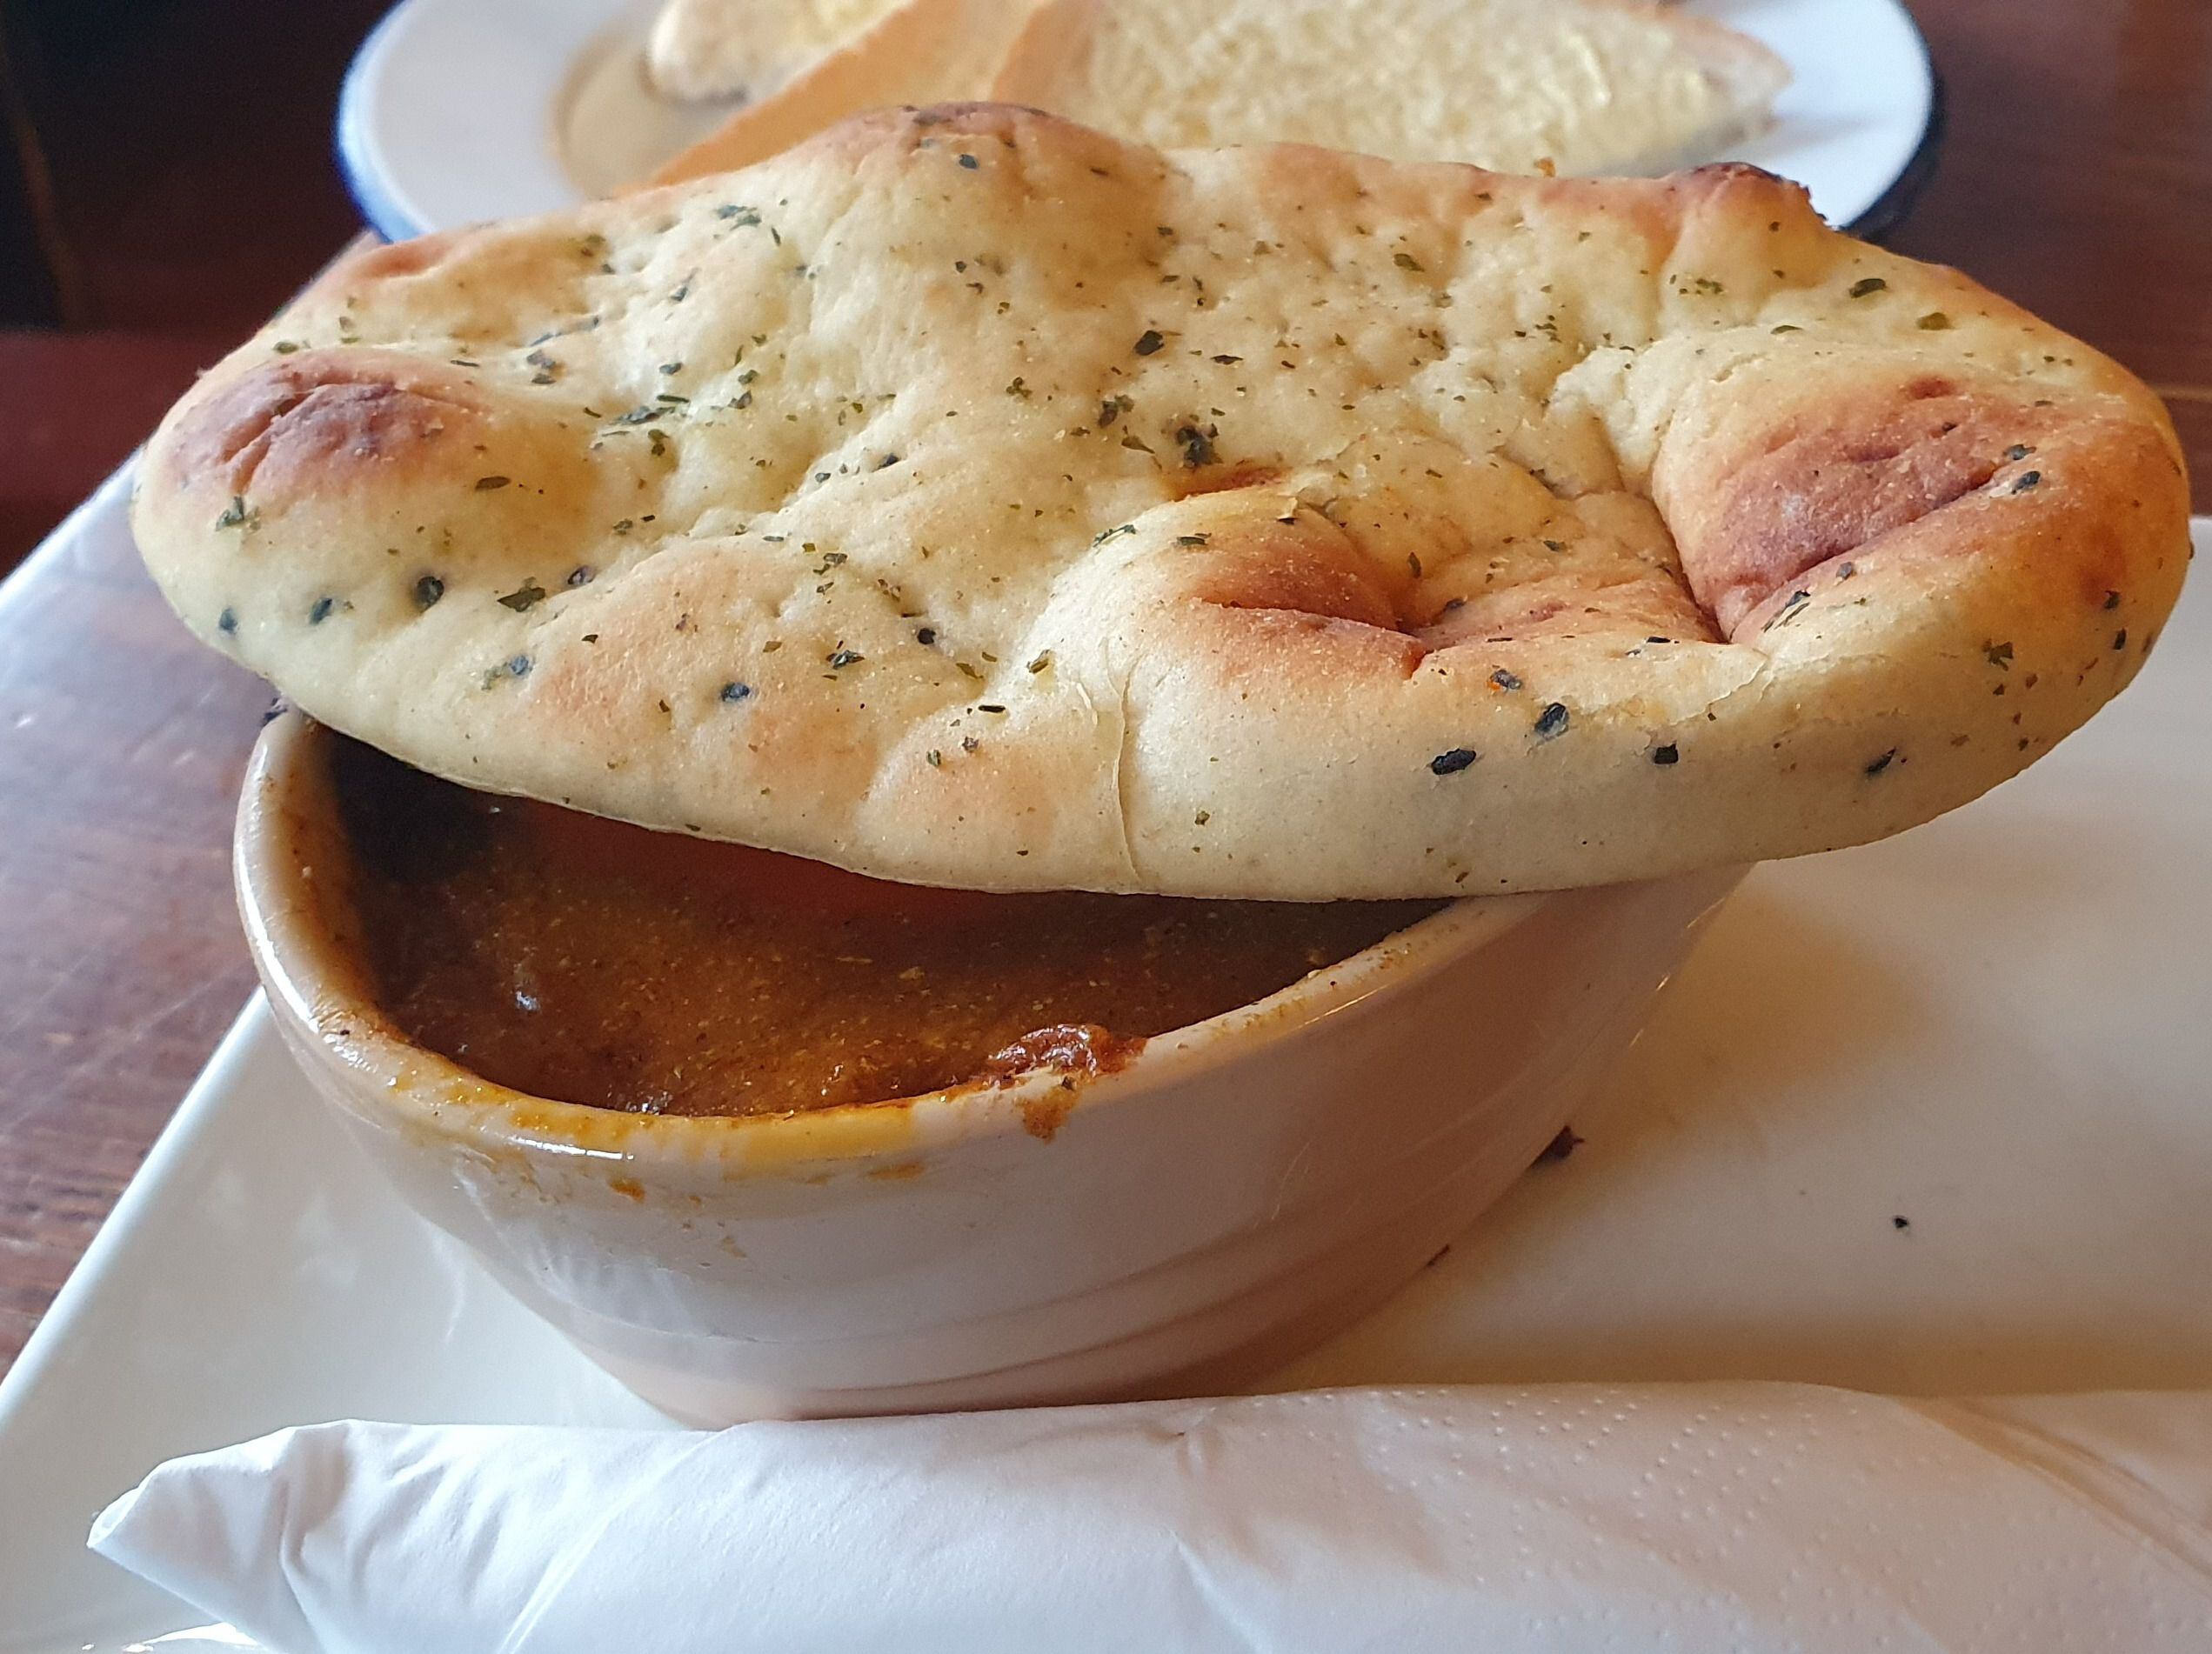 Food review: I had a bostin pie in one of the Black Country's best restaurants - I can't fault it